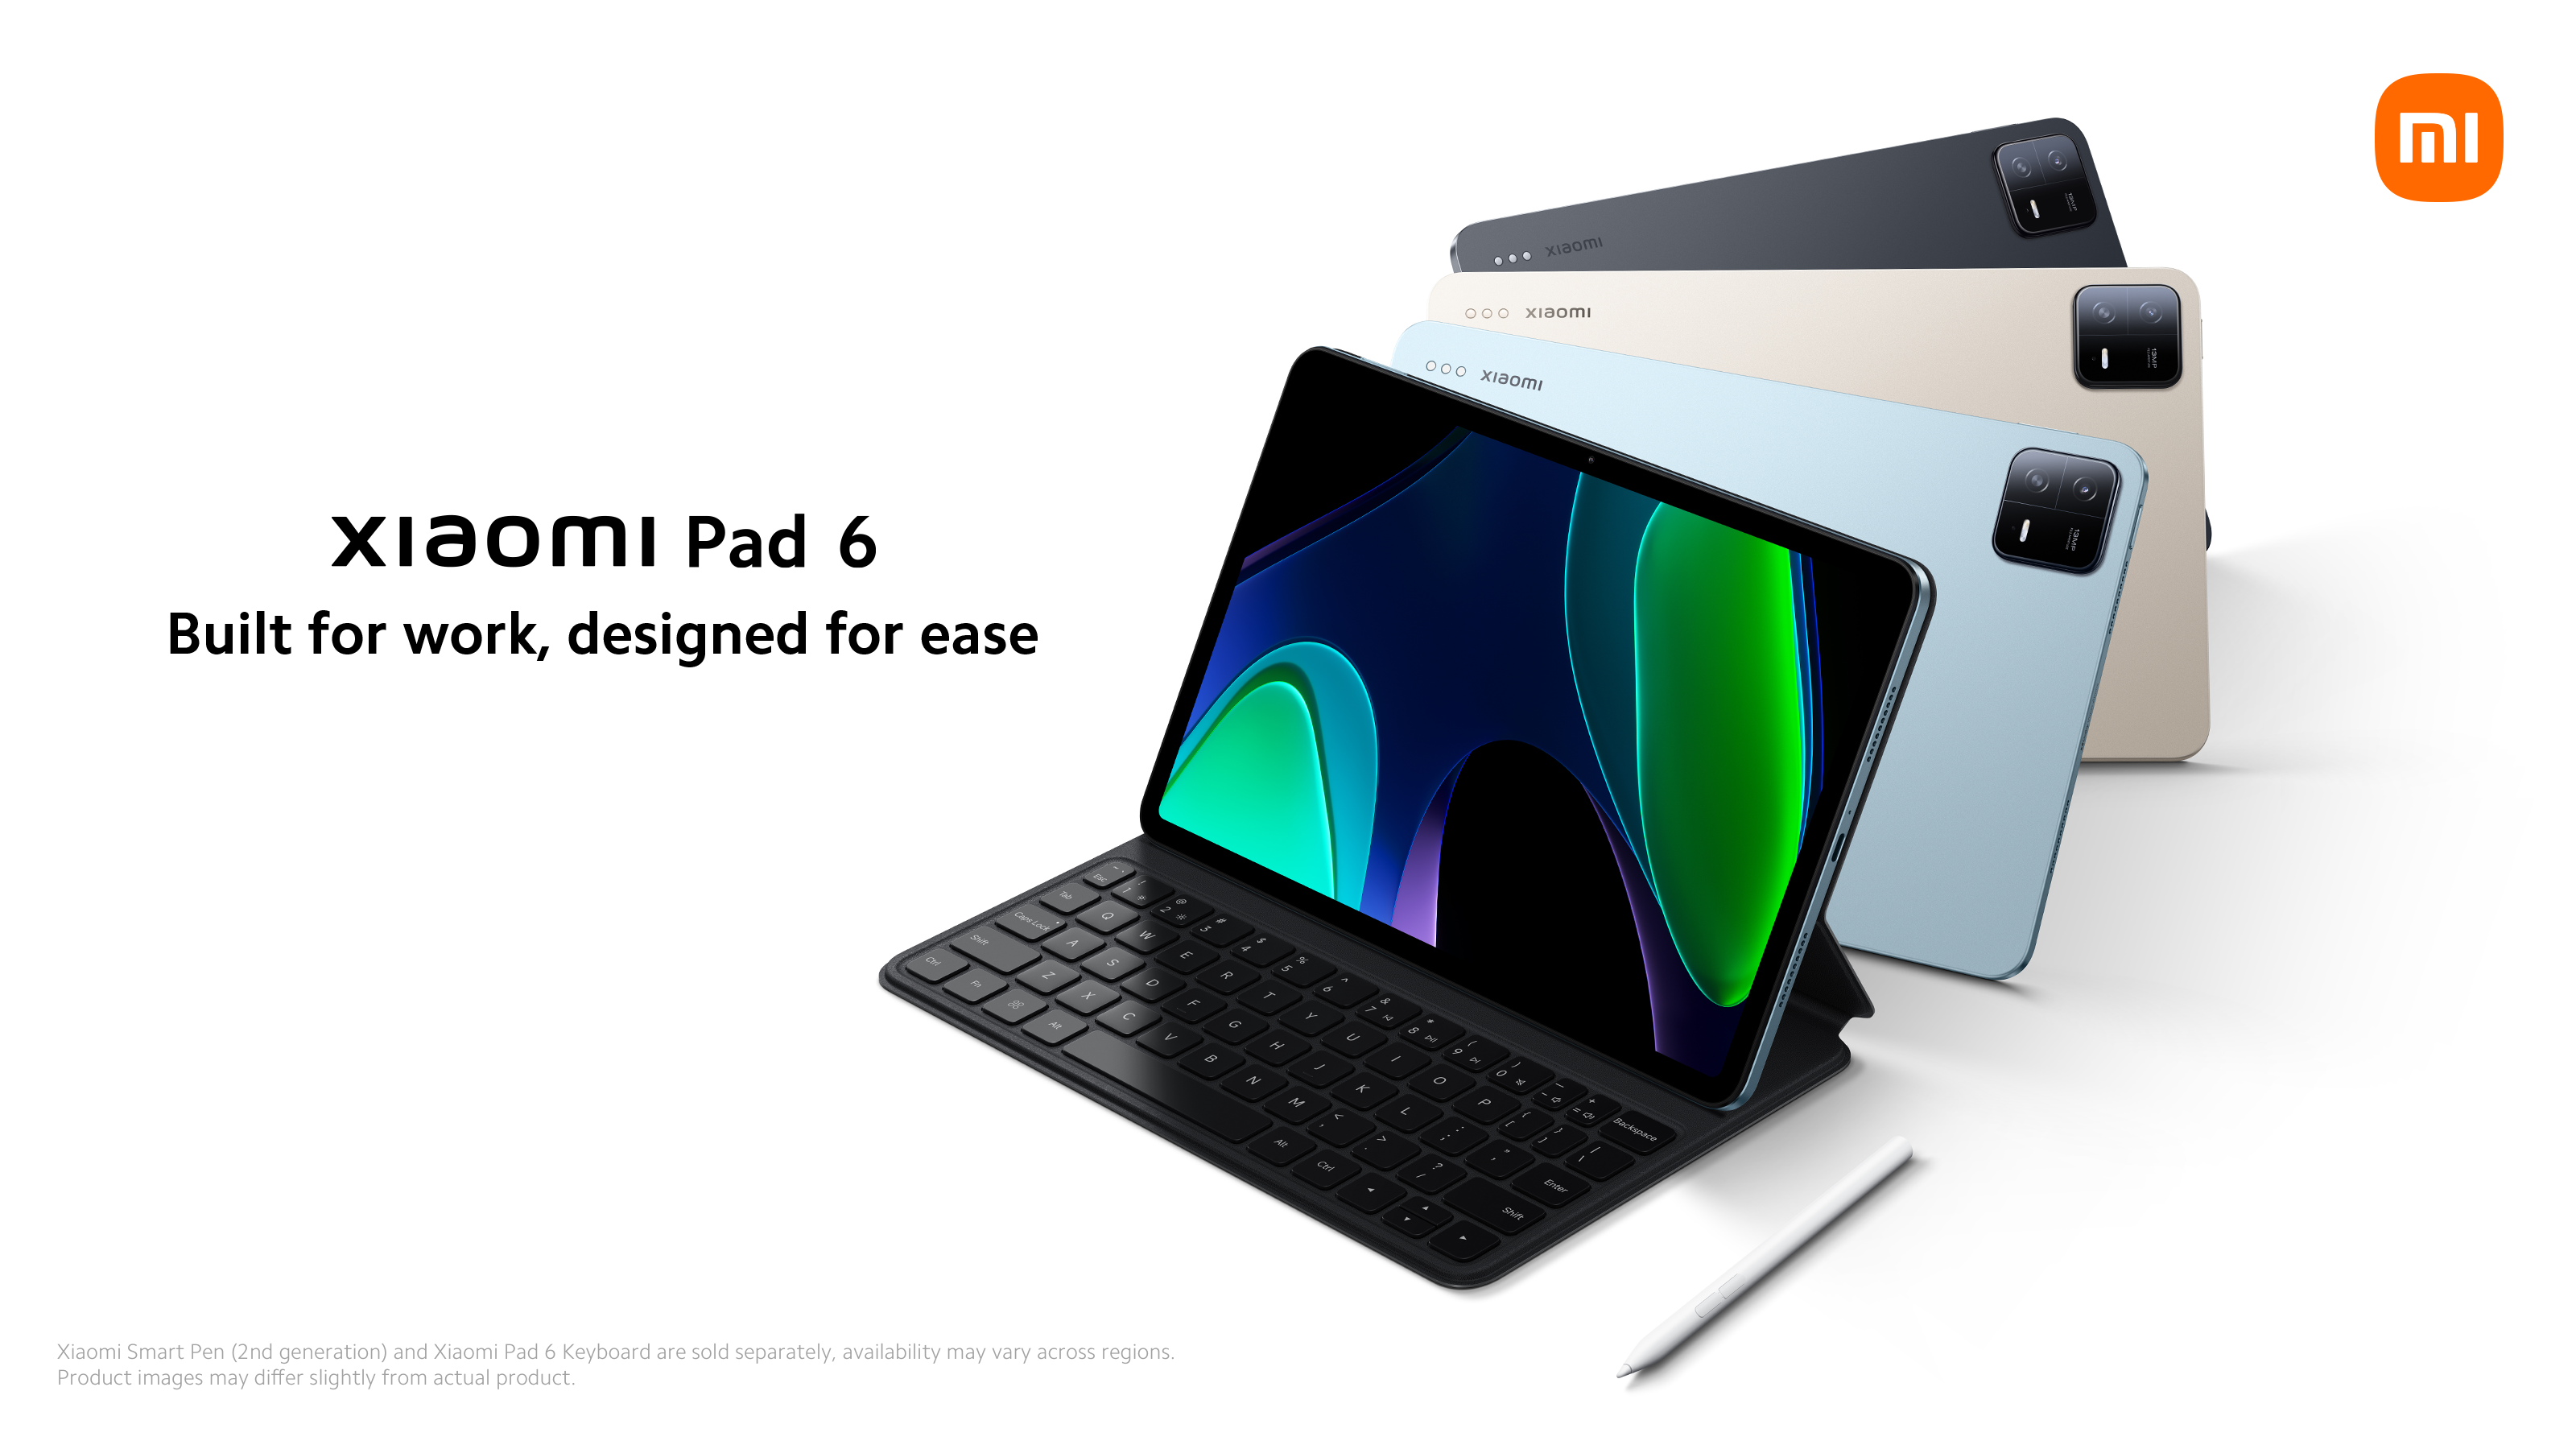 Xiaomi Pad 6 with accessories